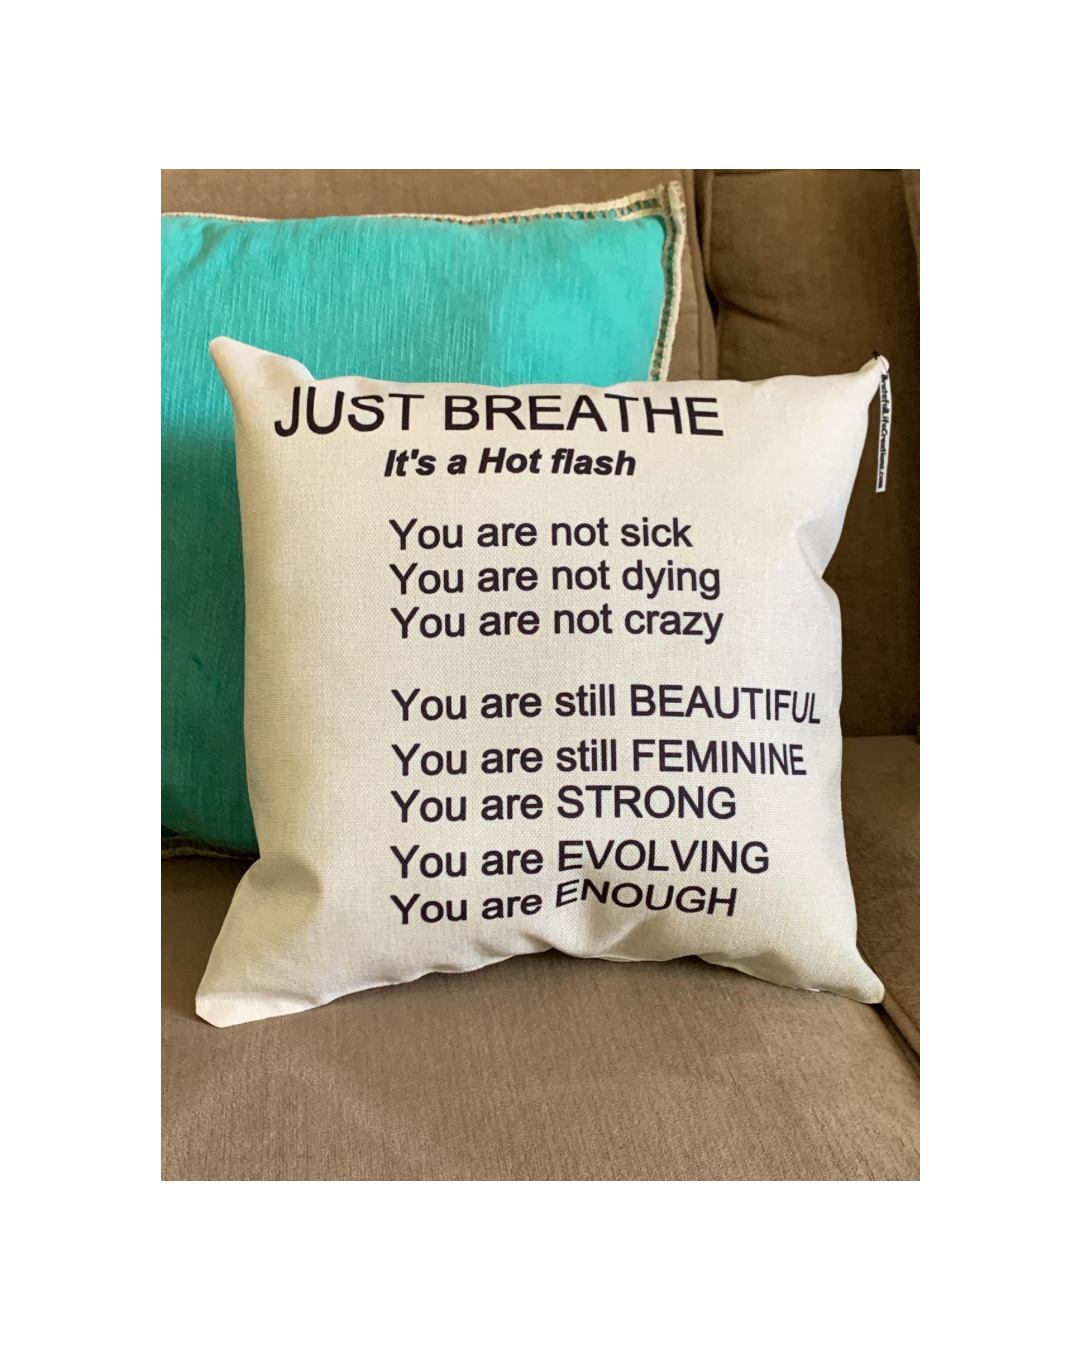 Hot Fash Menopause Affirmation Pillow